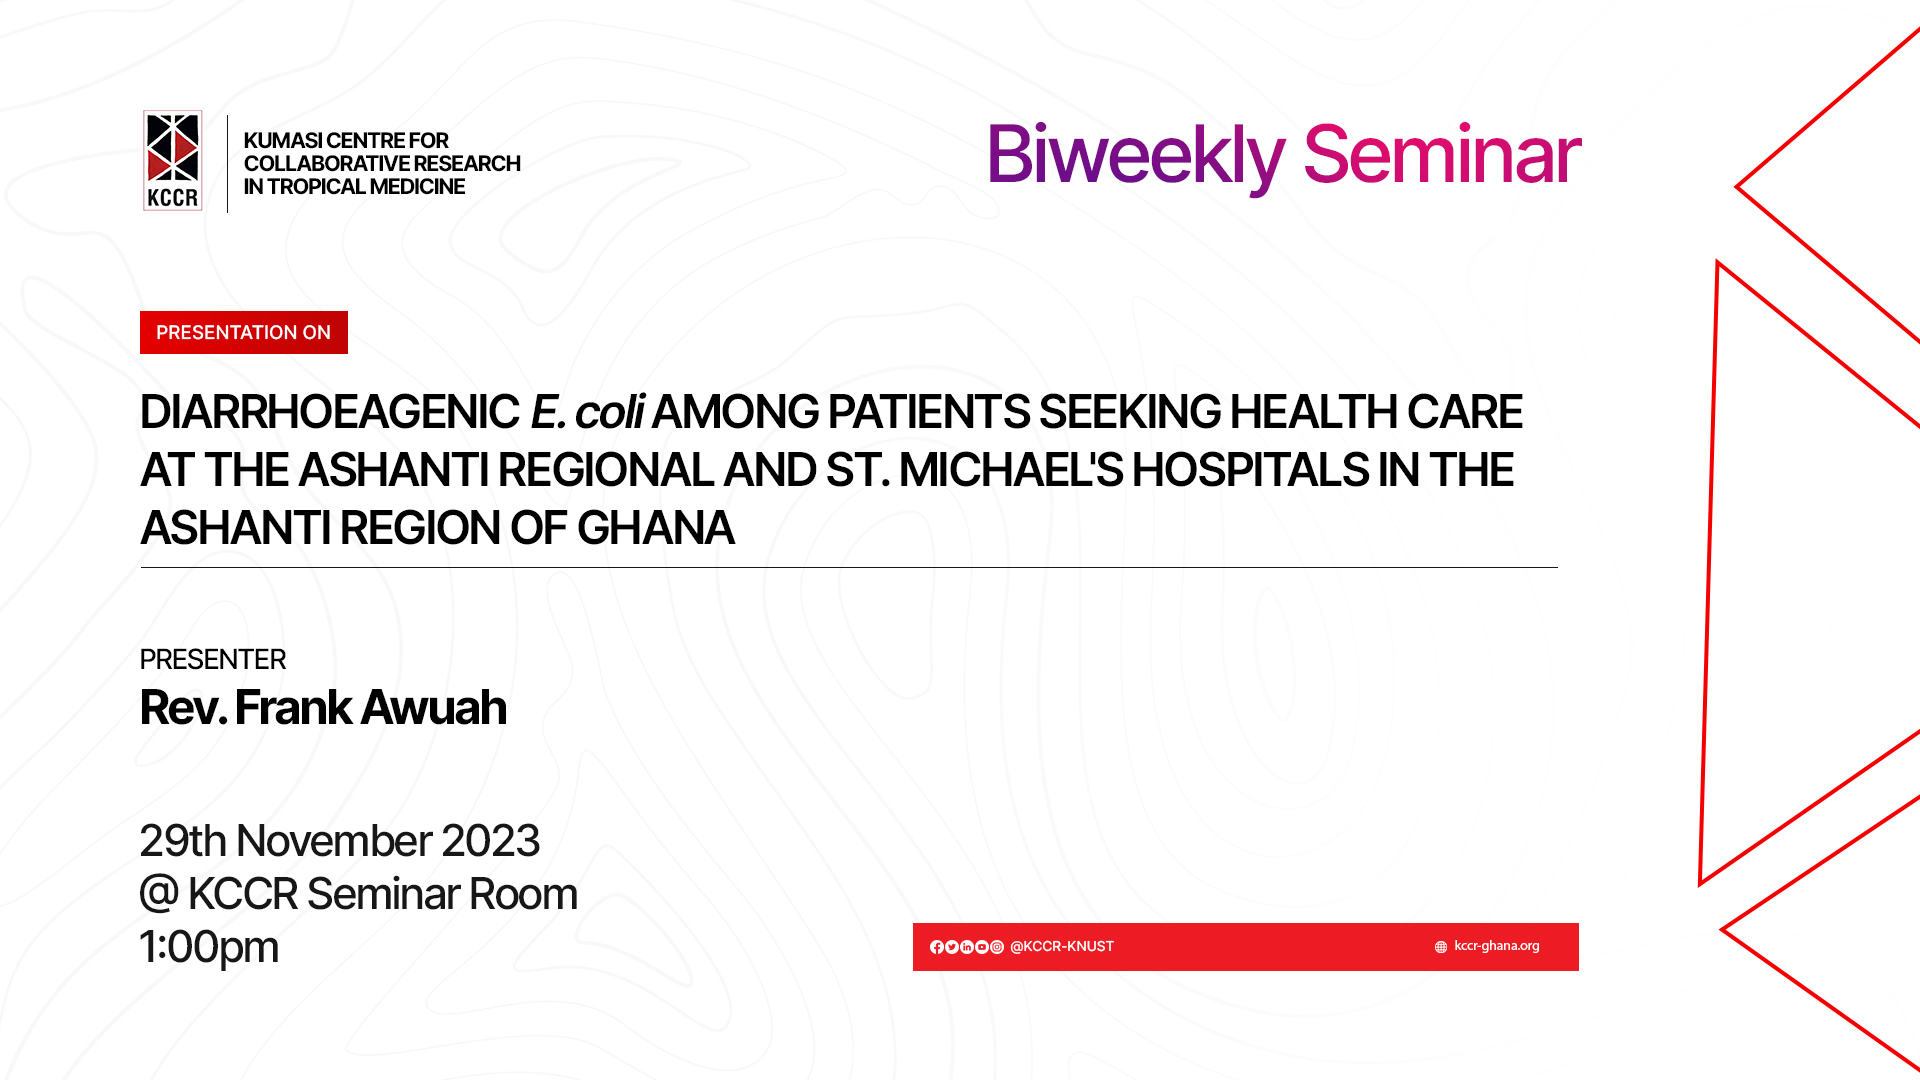 DIARRHOEAGENIC E. coli AMONG PATIENTS SEEKING HEALTH CAREAT THE ASHANTI REGIONAL AND ST. MICHAEL’S HOSPITALS IN THE ASHANTI REGION OF GHANA – Presentation by Rev. Frank Awuah